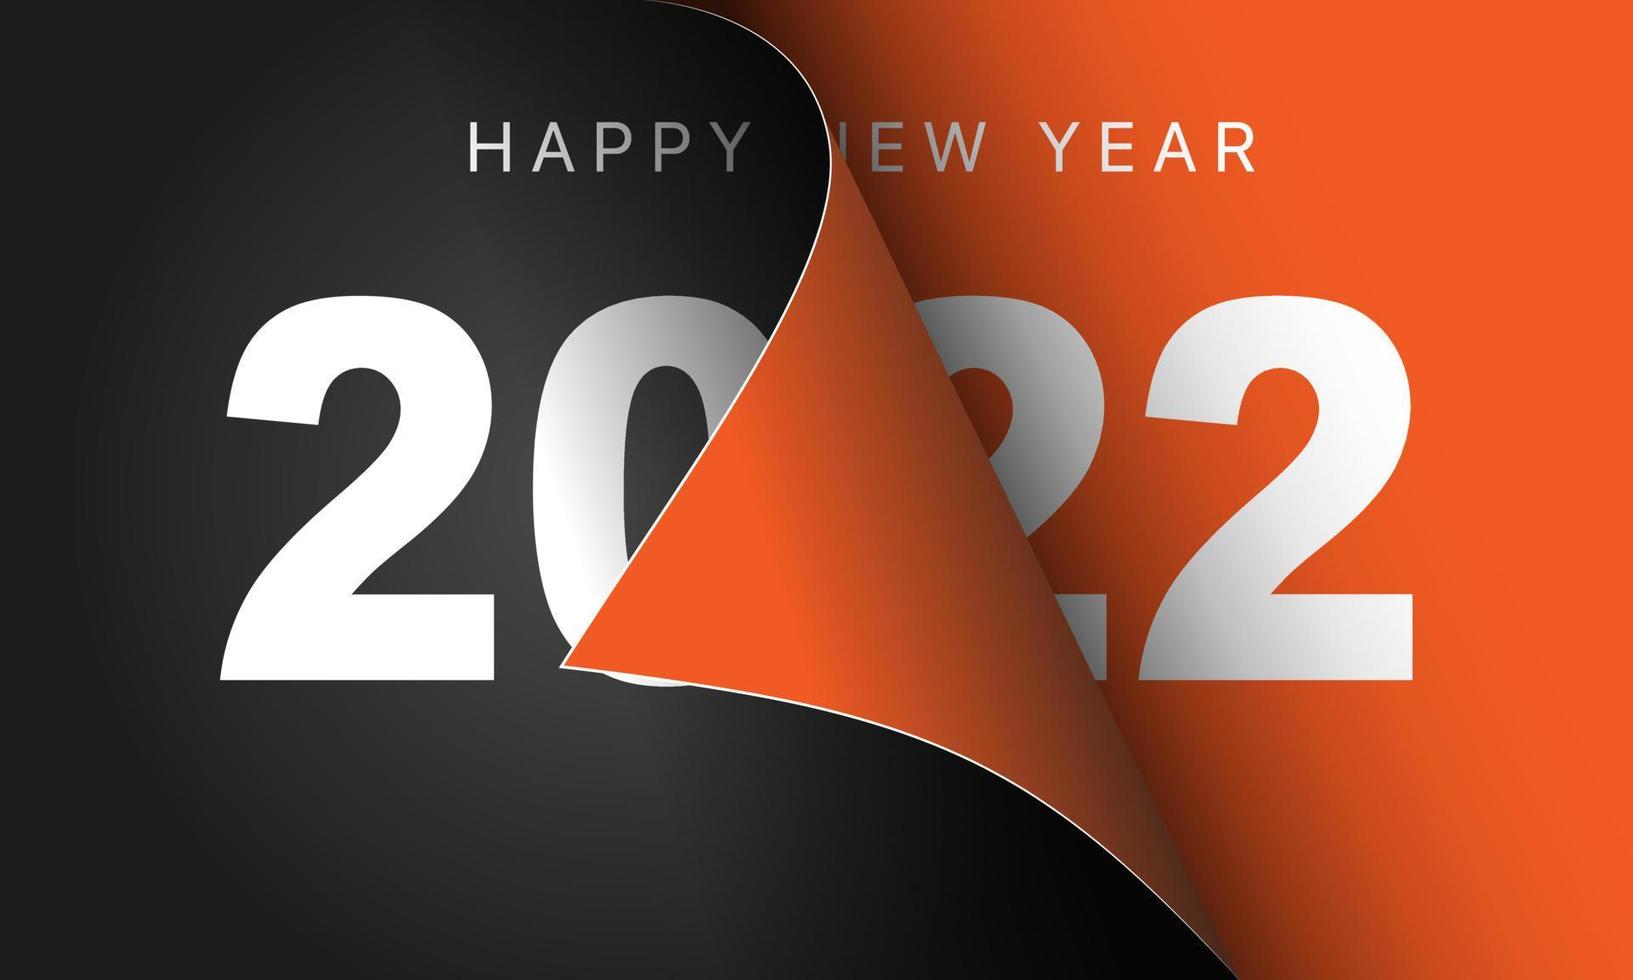 Happy New Year 2022  greeting card design template. End of 2021 and beginning of 2022. The concept of the beginning of the New Year. The calendar page turns over and the new year begins. vector